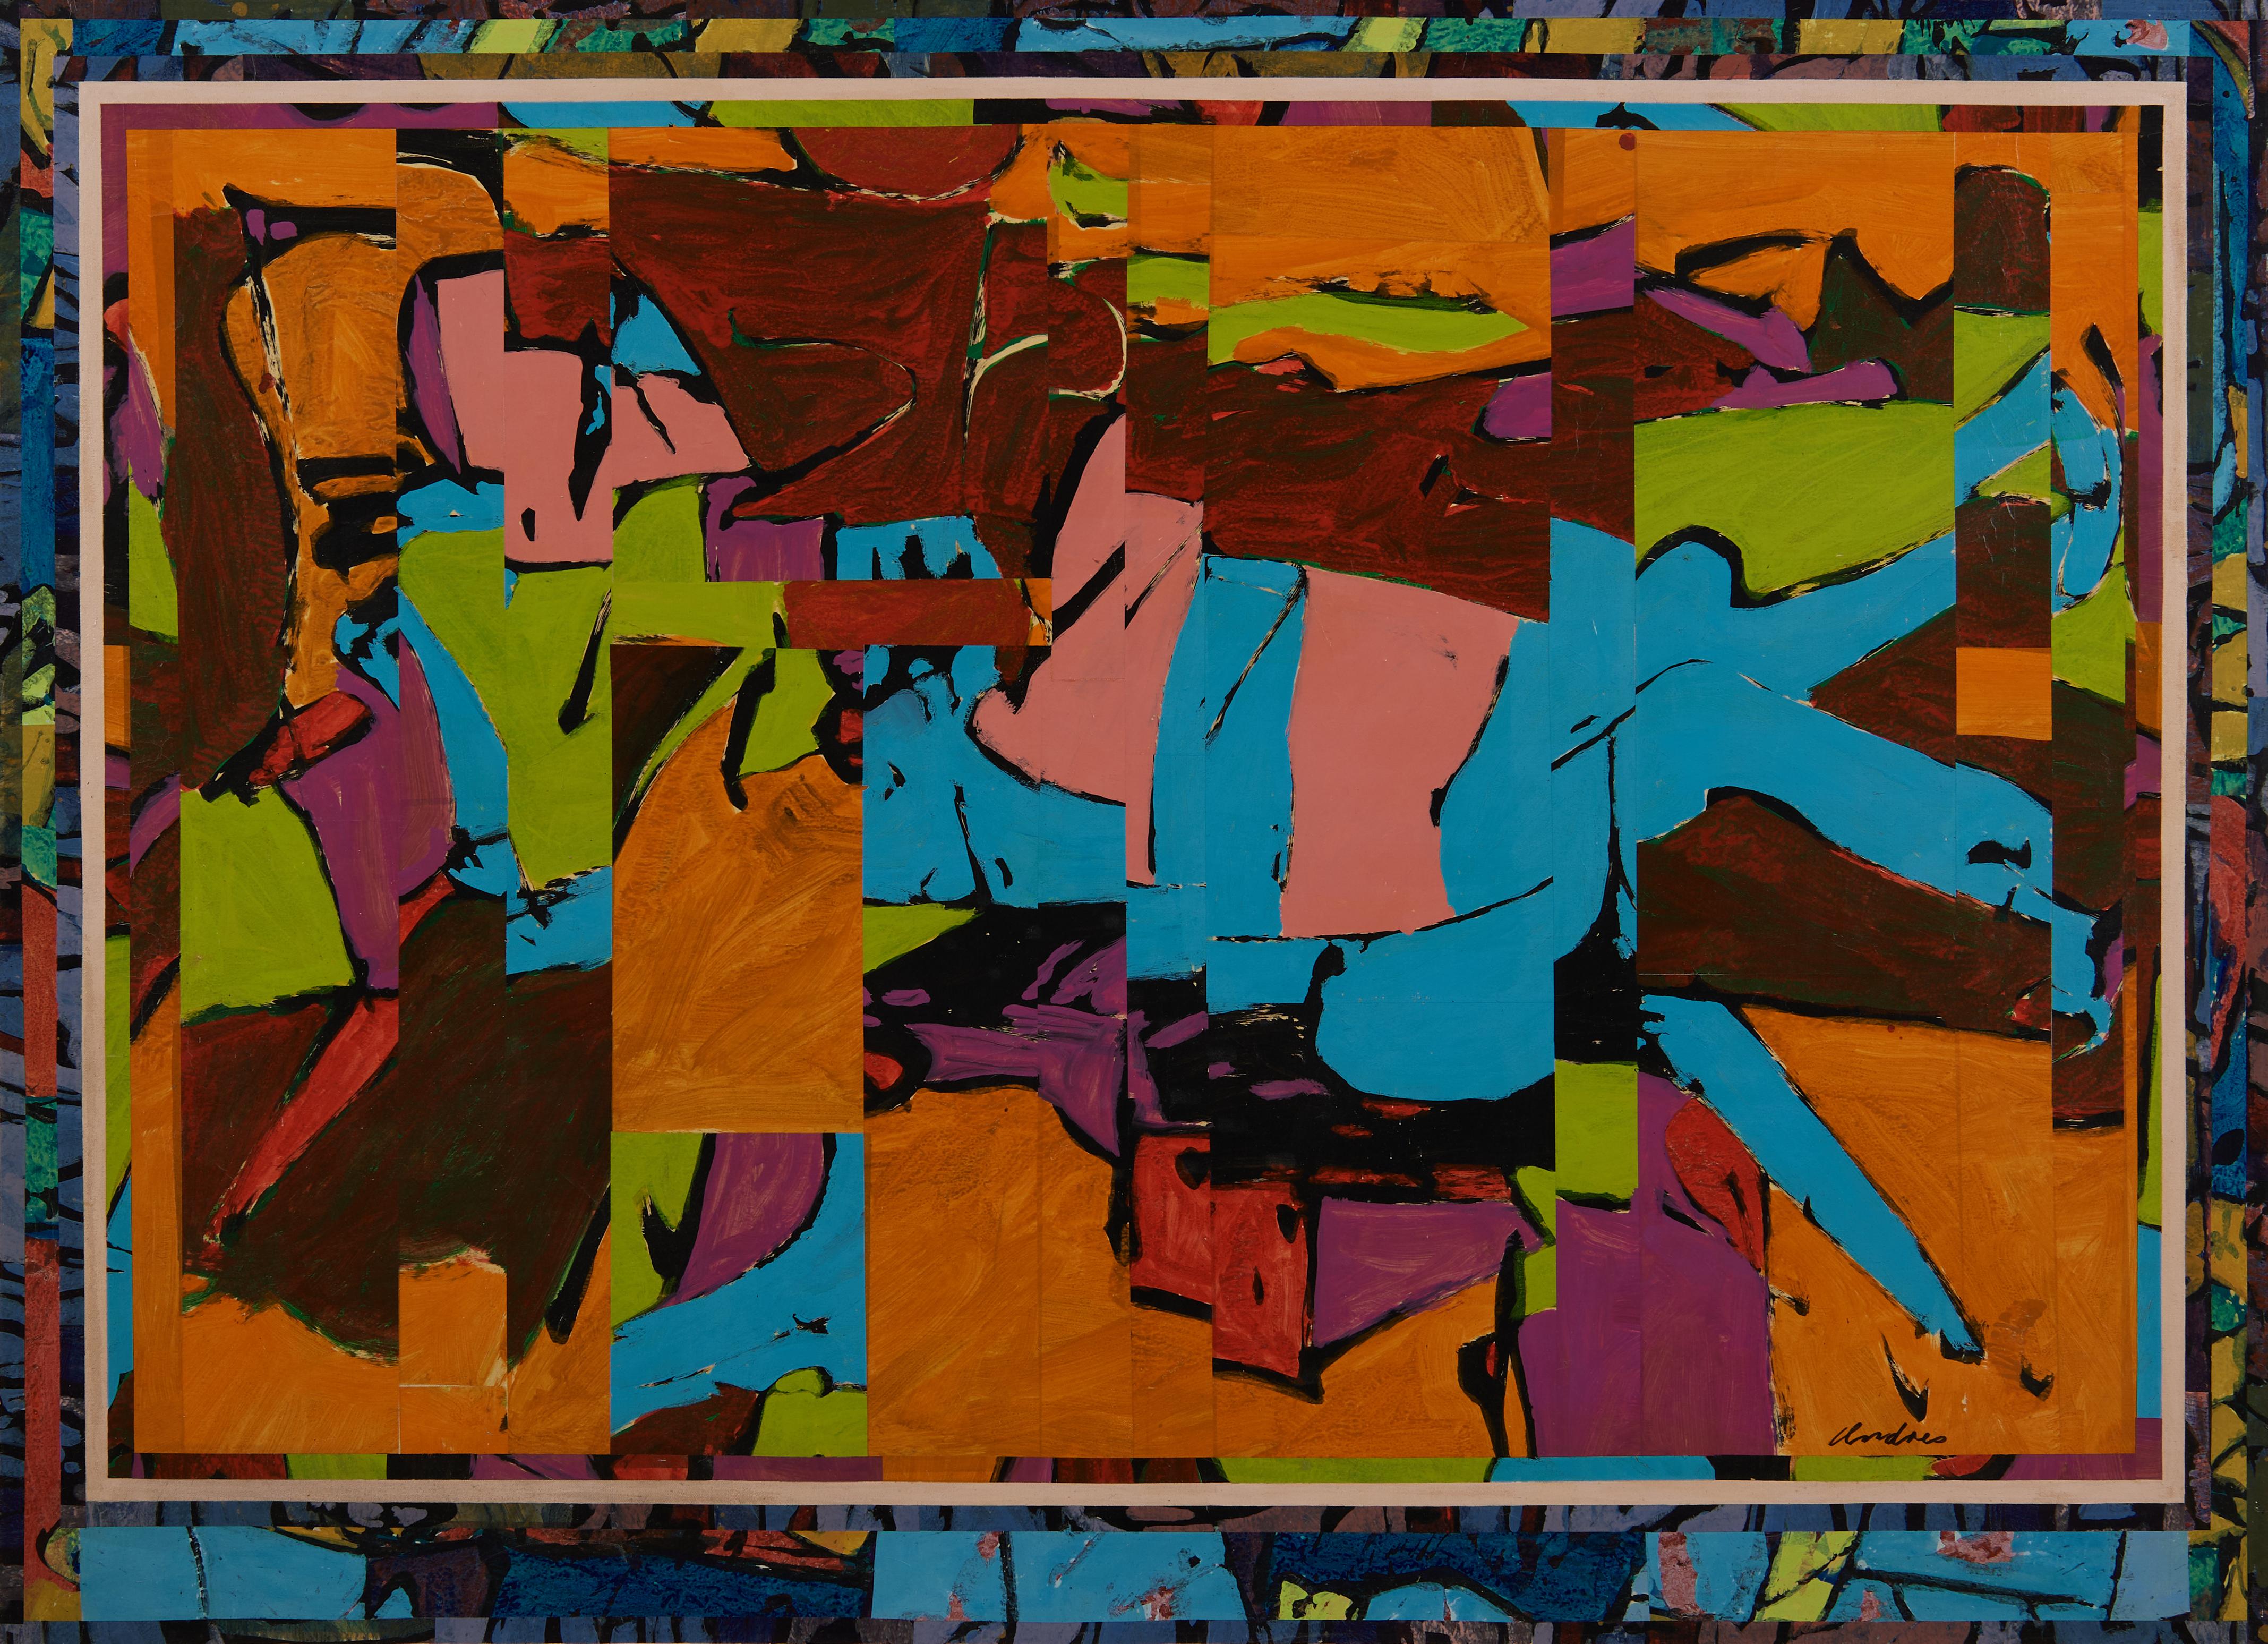 L. S. F. vibrant abstract expressionist painting by Cleveland School artist - Painting by Richard Andres